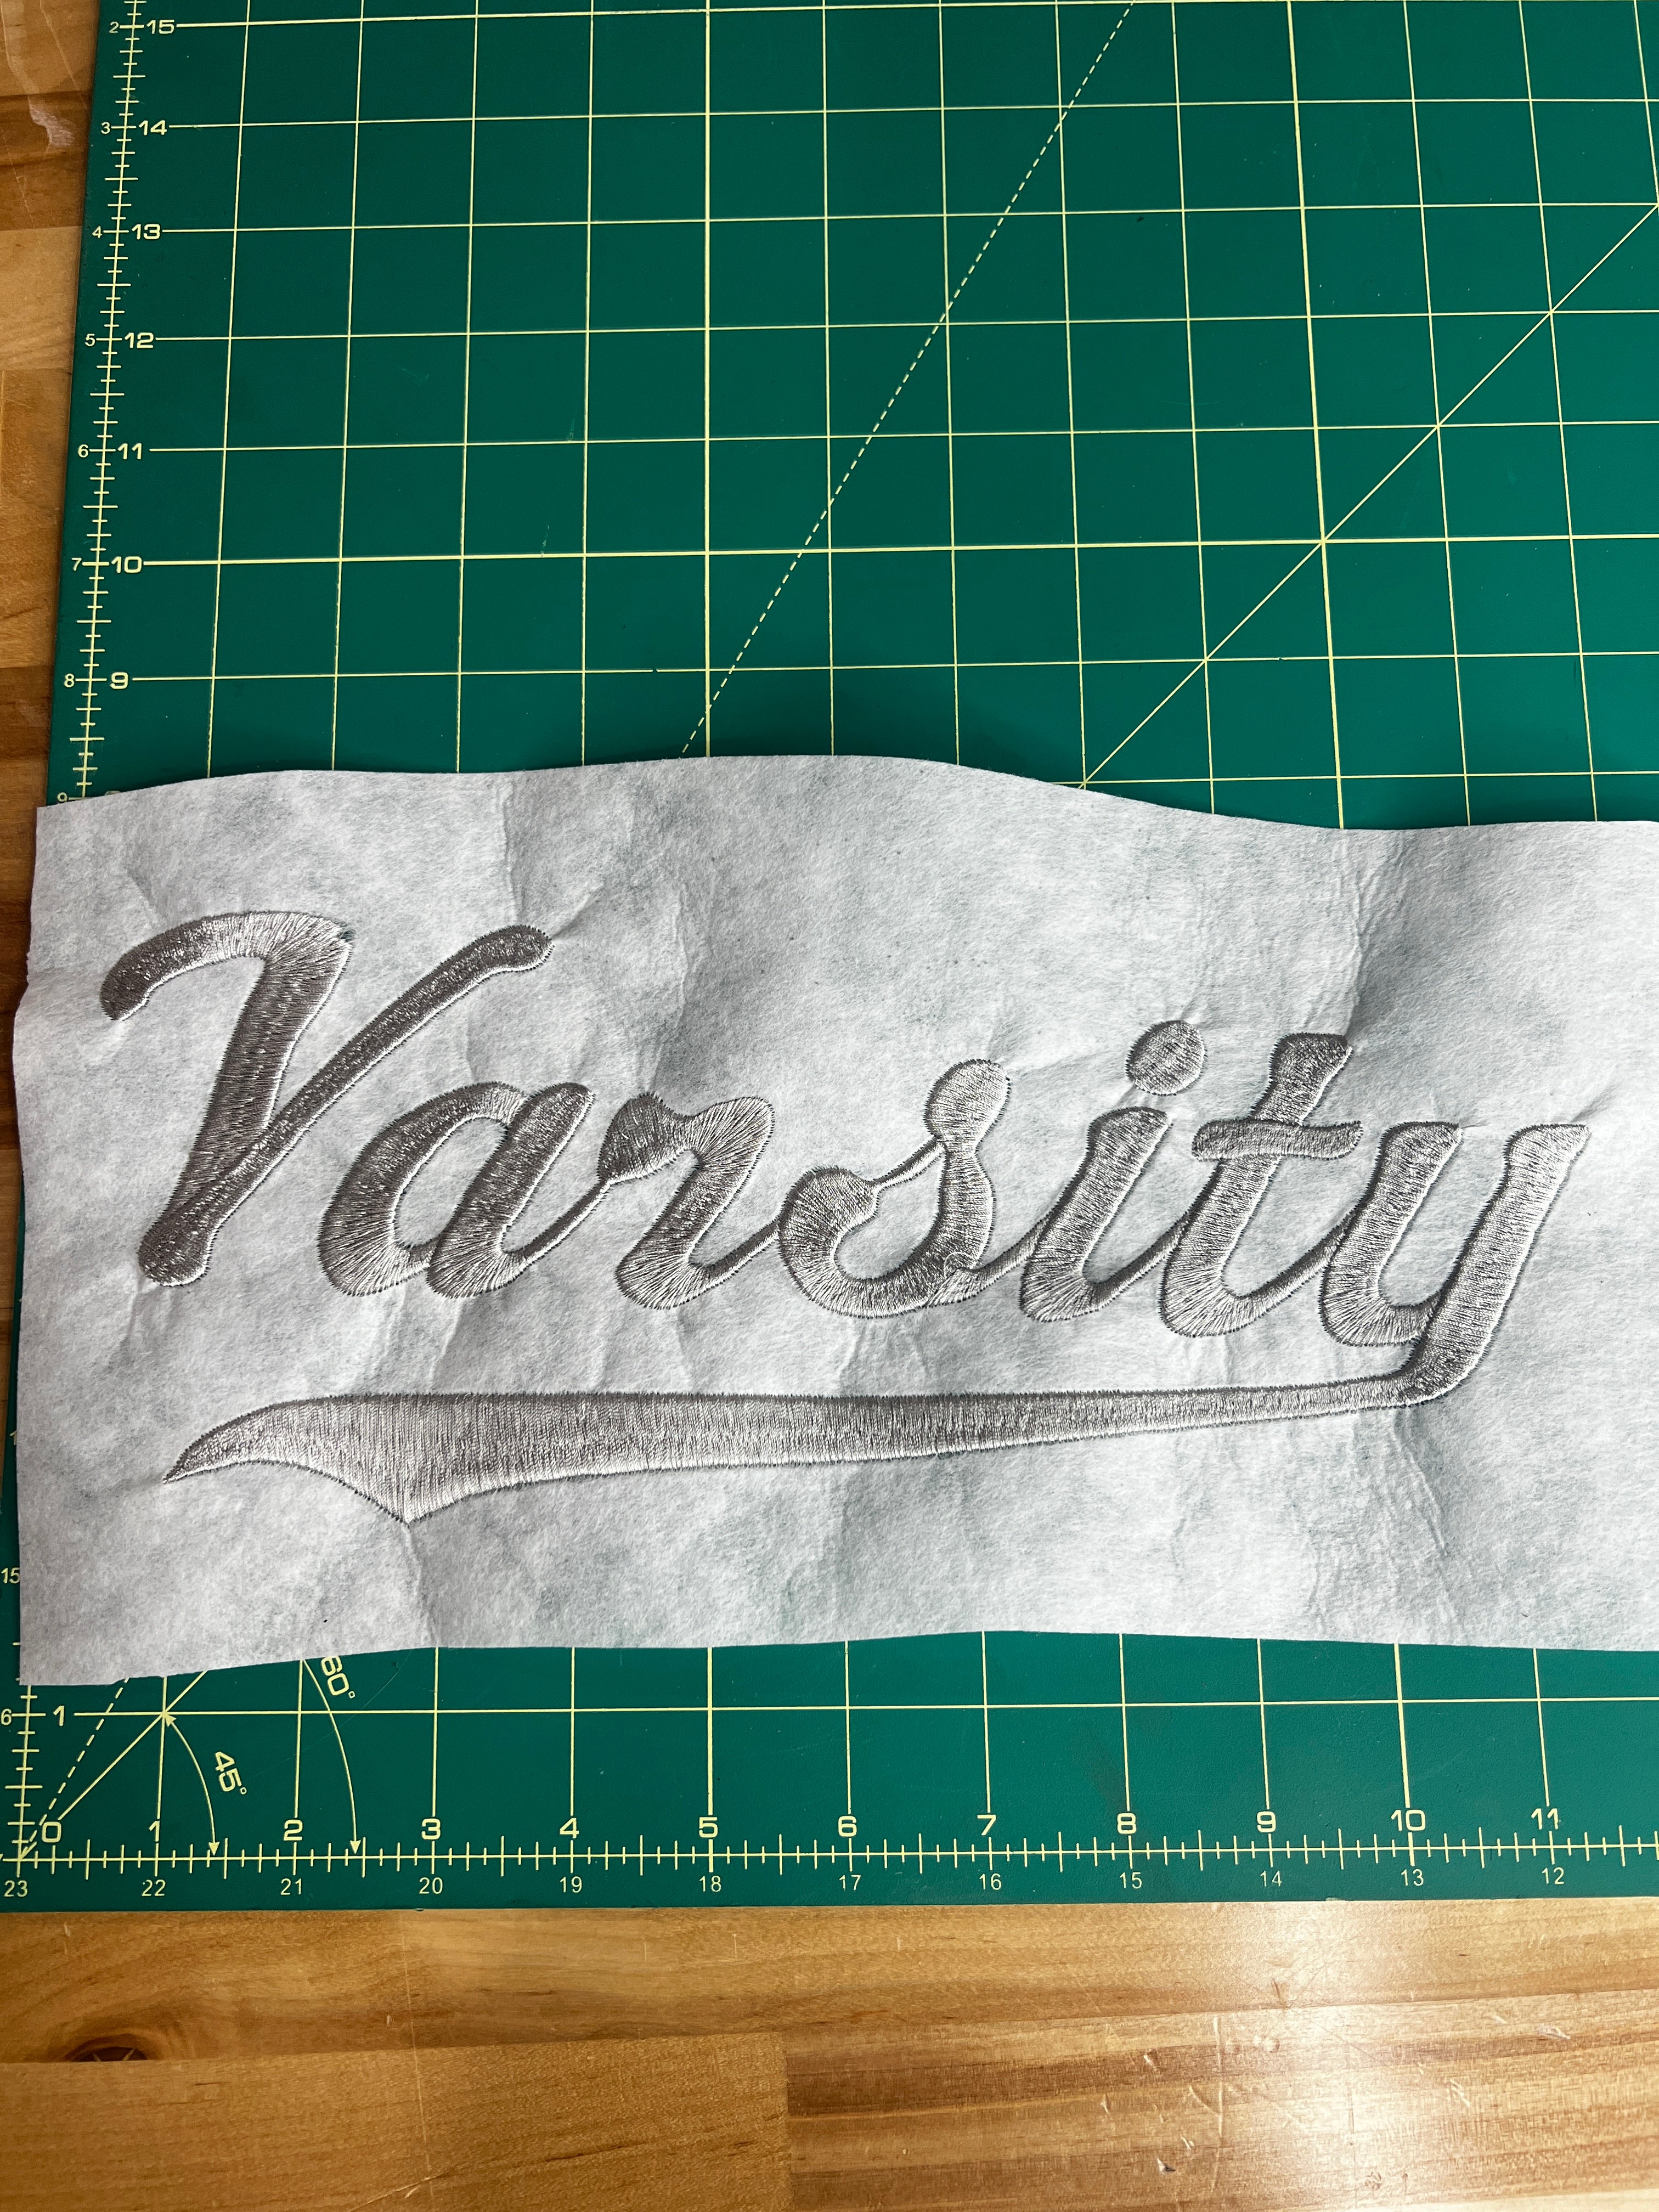 Varsity .DST Embroidery File